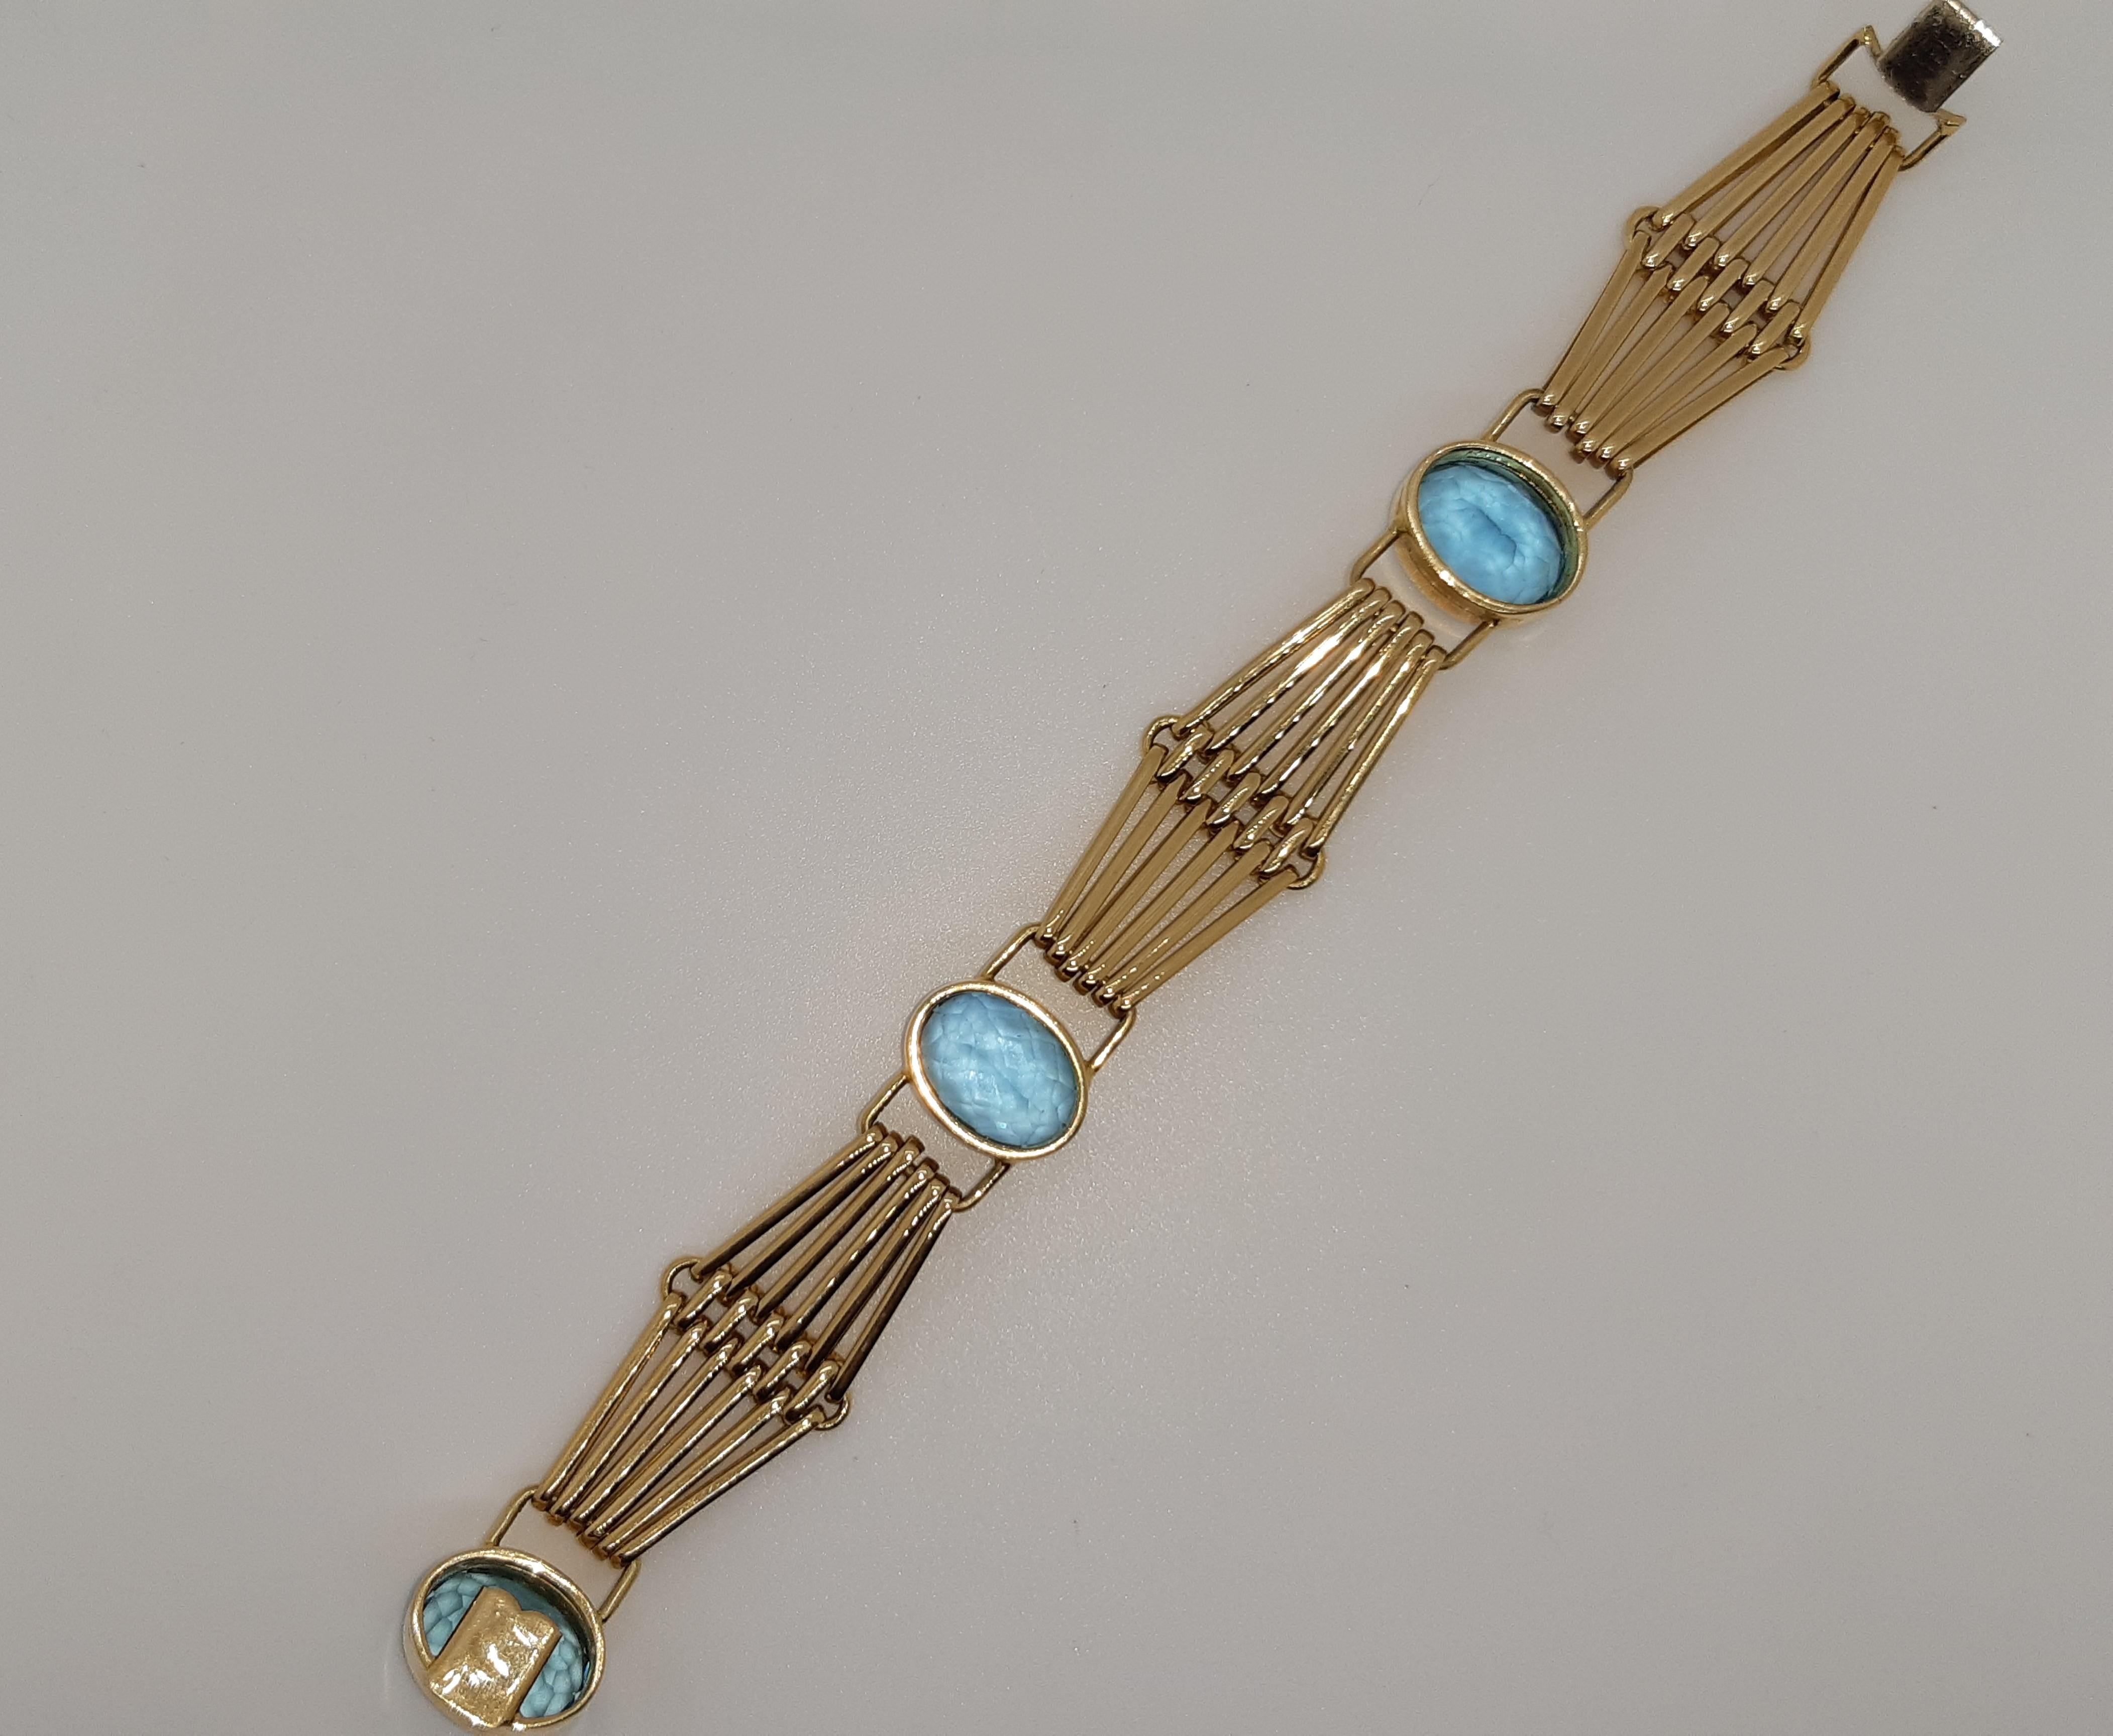 1950s bracelet in 18 kt gold with three blue topazes, with articulated links.
weight 50 g, 